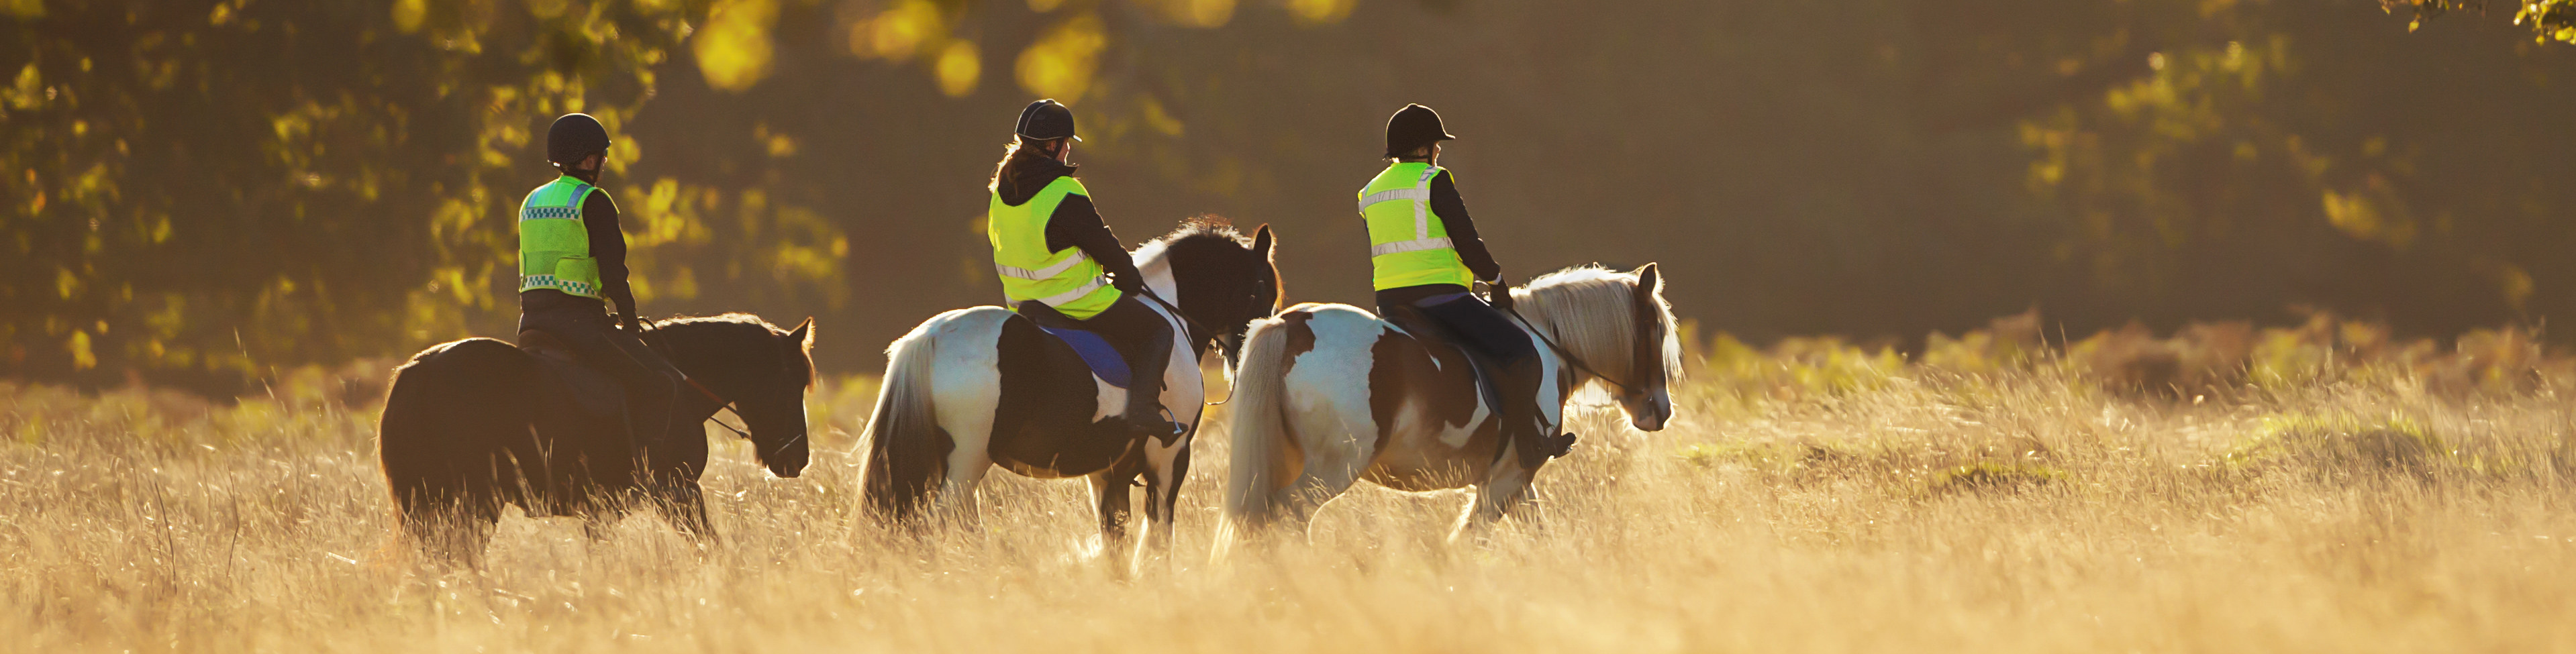 Actisaf and Equine Behaviour - Trial summary